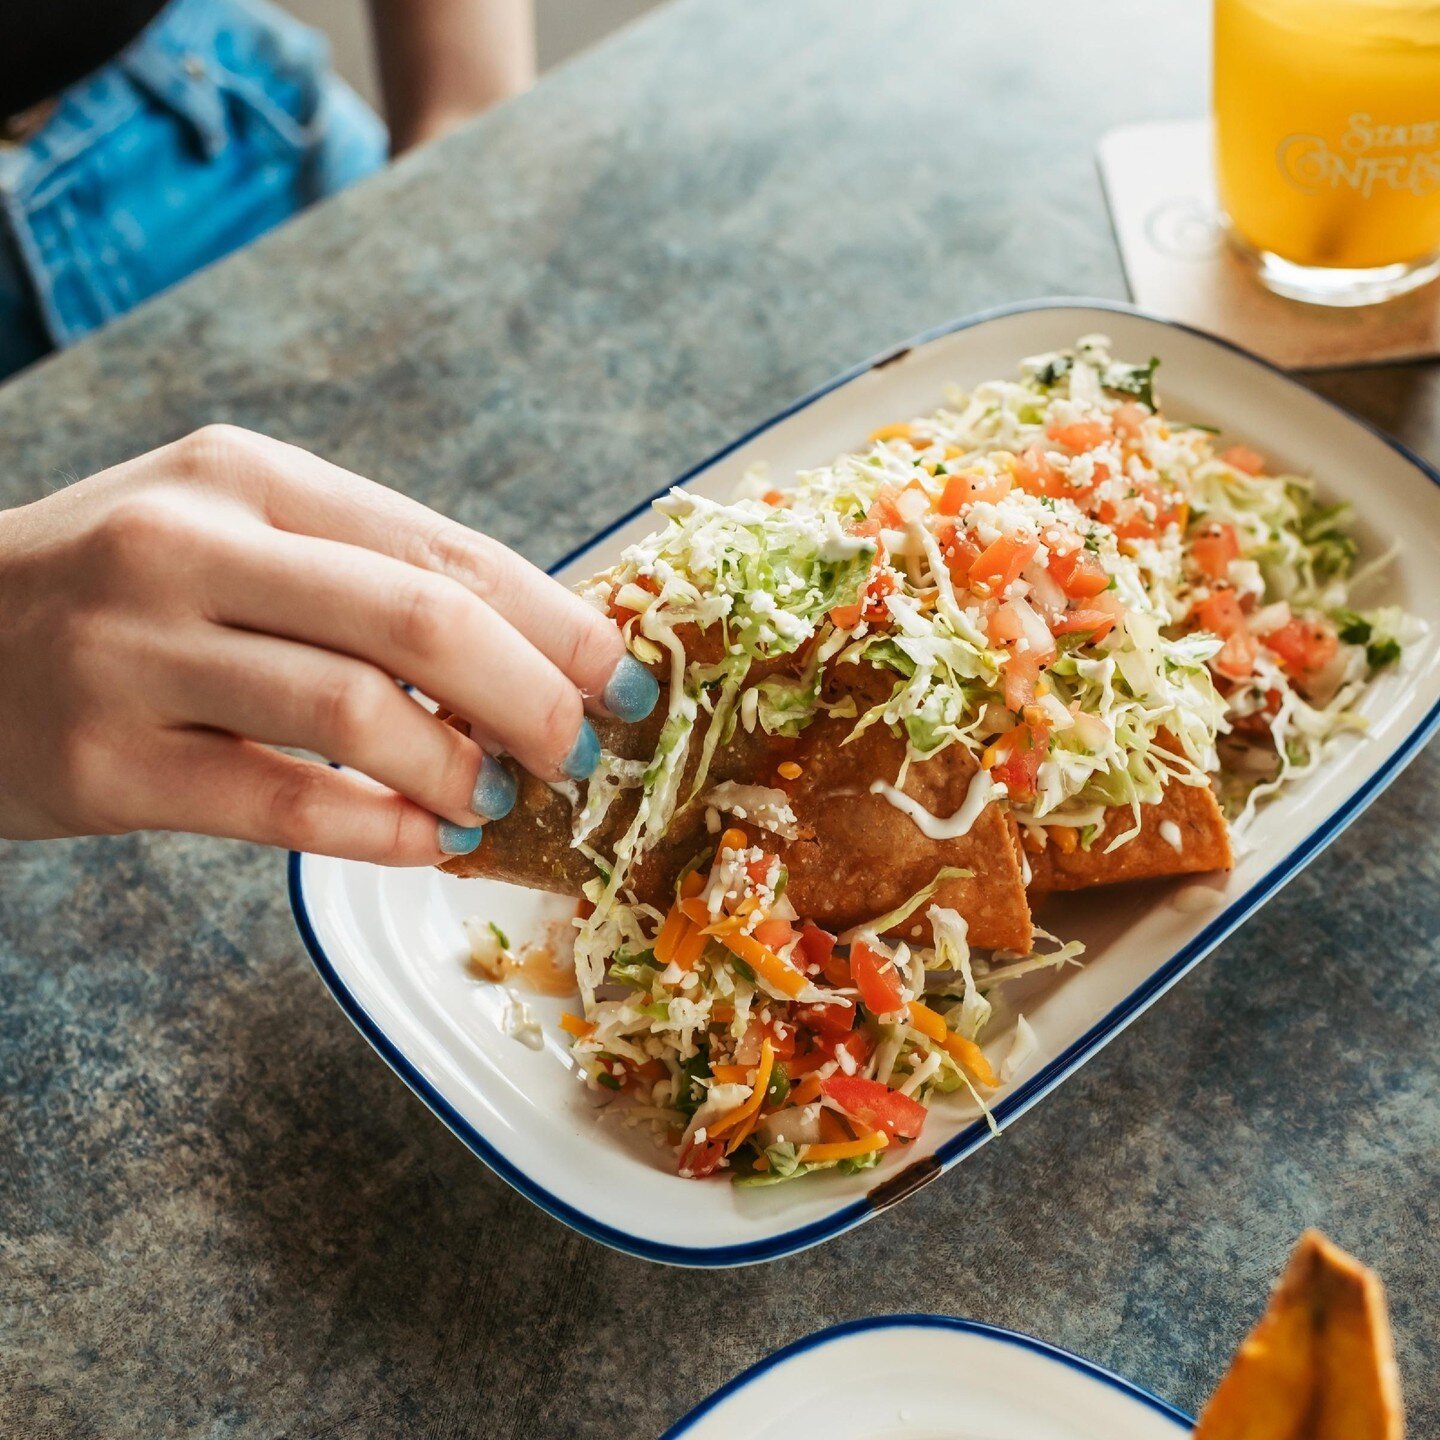 Get into the festive spirit this Cinco de Mayo with our delicious beef tacos and ice-cold draft margaritas at State of Confusion. 

Let's raise a glass and cheers to good food, good drinks, and good times!🌮🎉